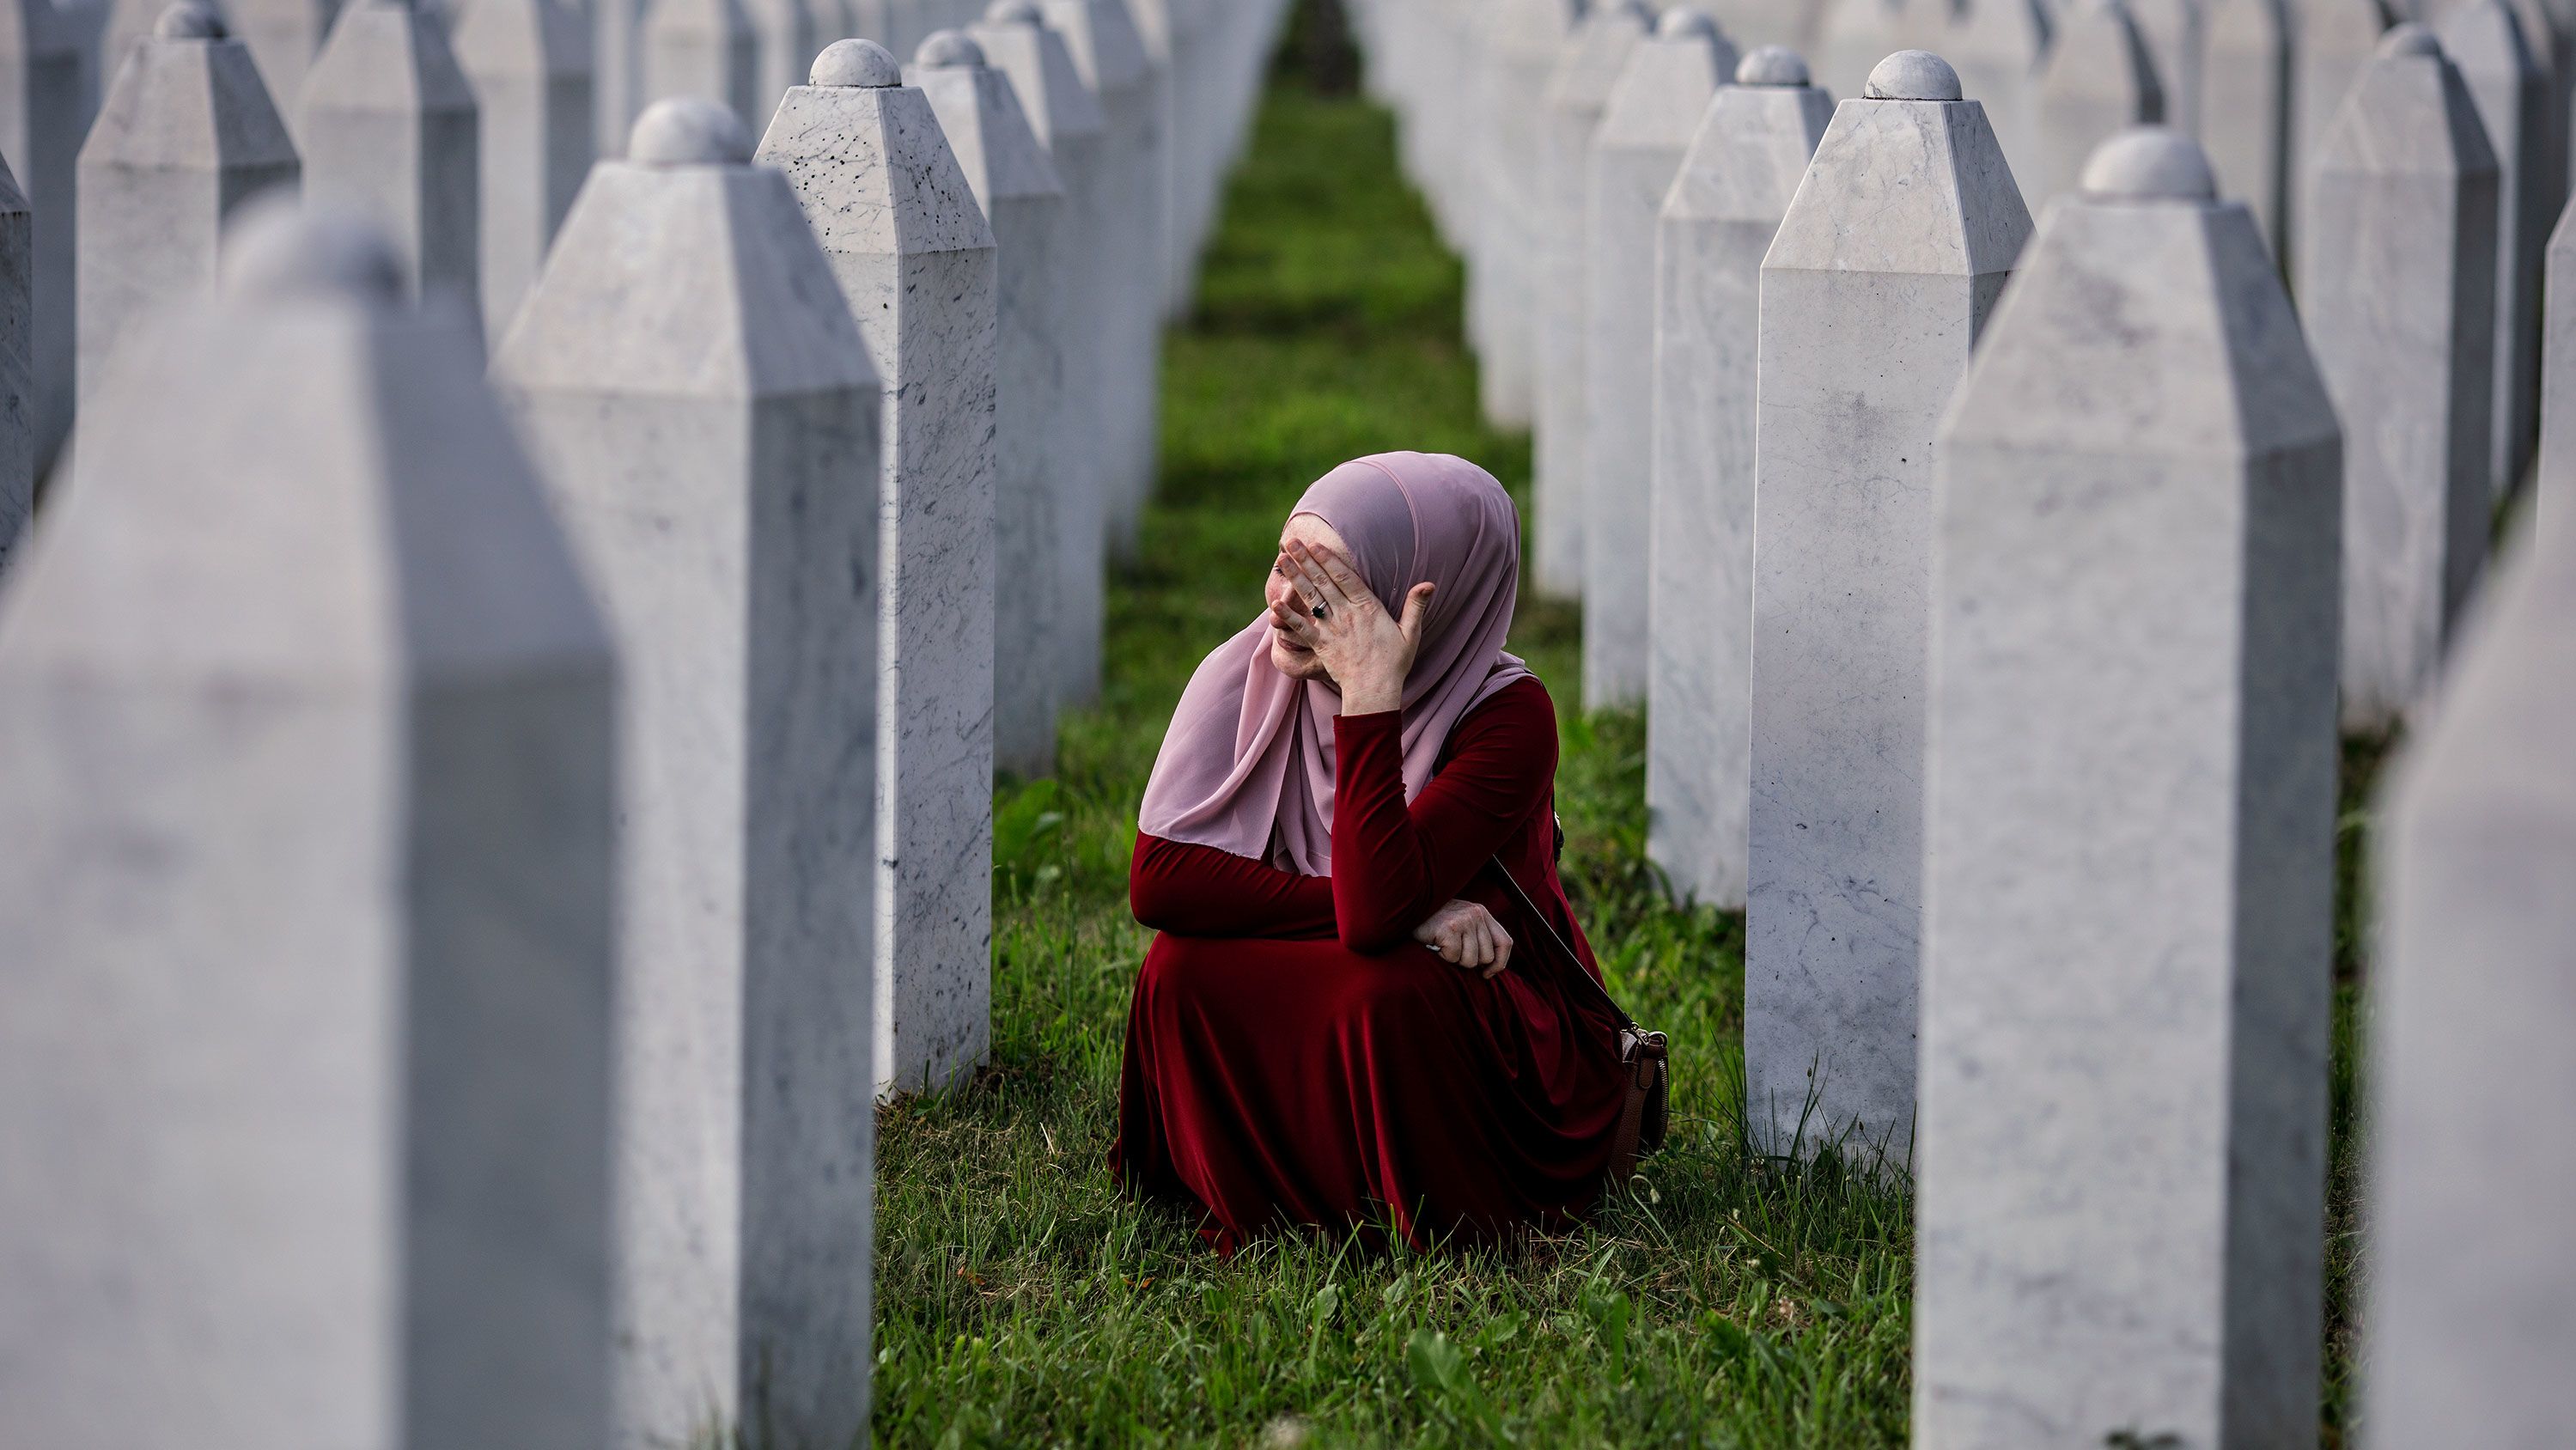 A Bosnian Muslim woman cries between graves of her father, two grandfathers and other close relatives, all victims of the 1995 Srebrenica genocide, in July 2020. 